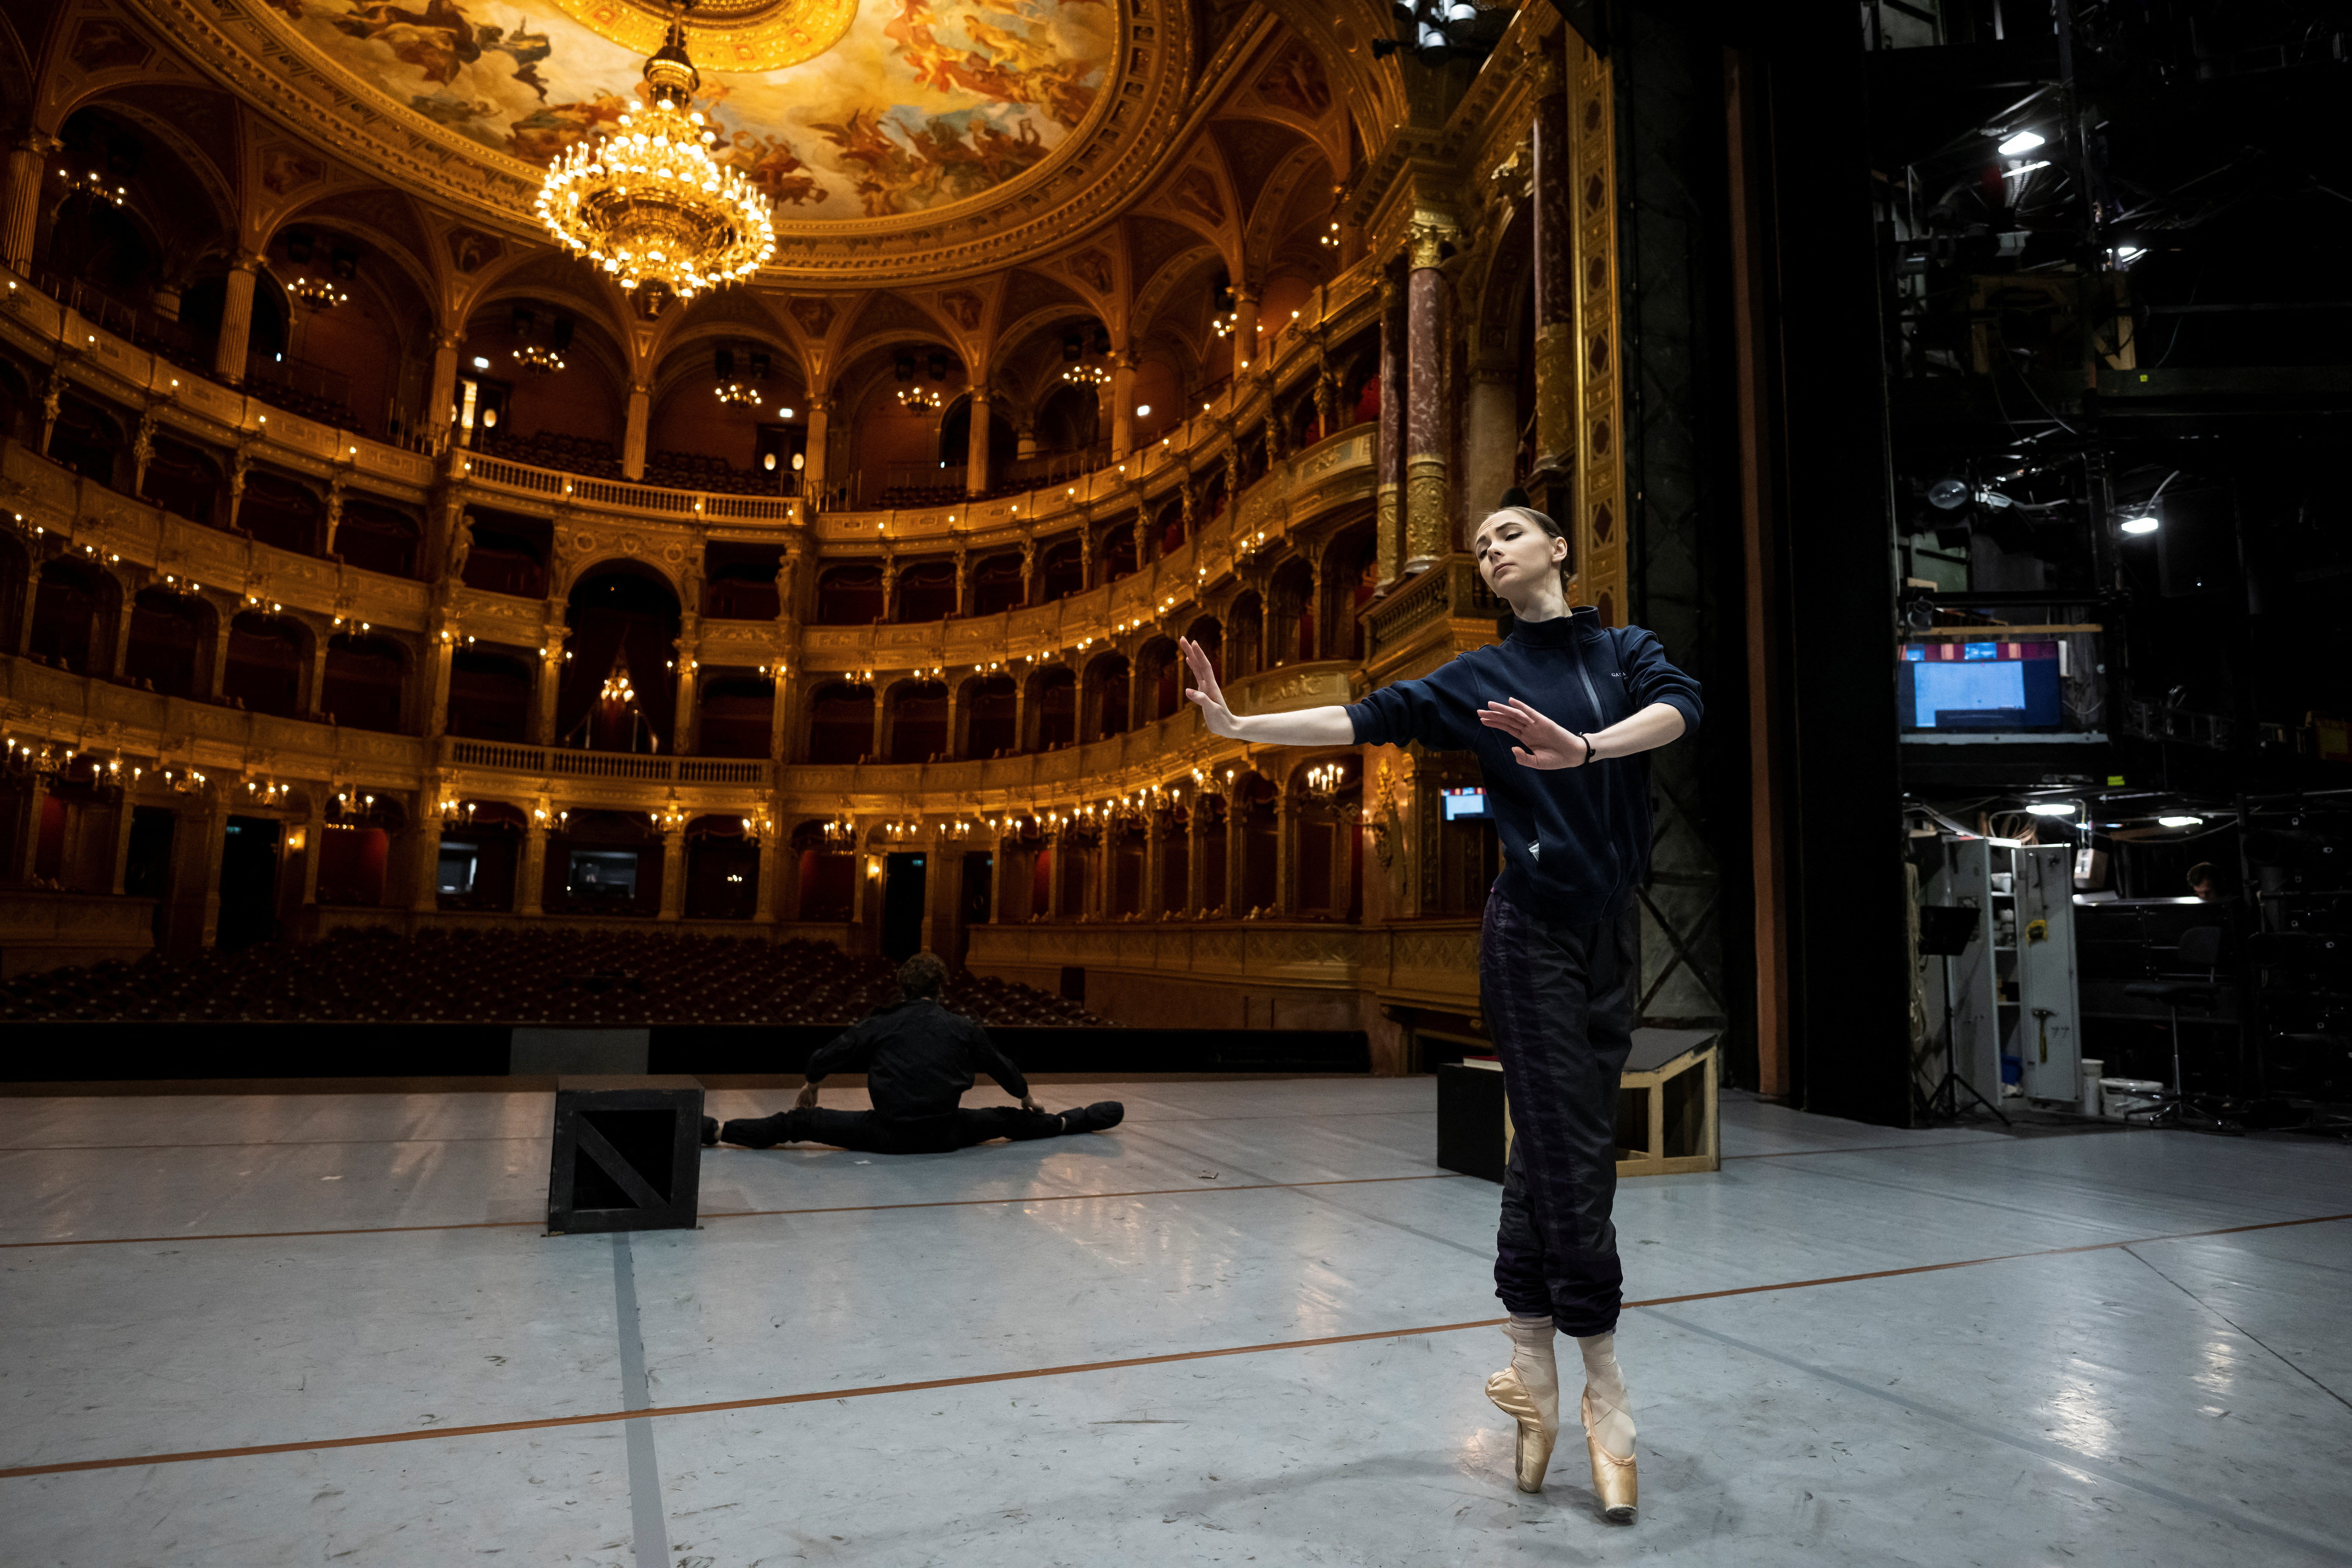 The Wider Image:  Ukrainian ballerina uprooted by war flies high again in Swan Lake